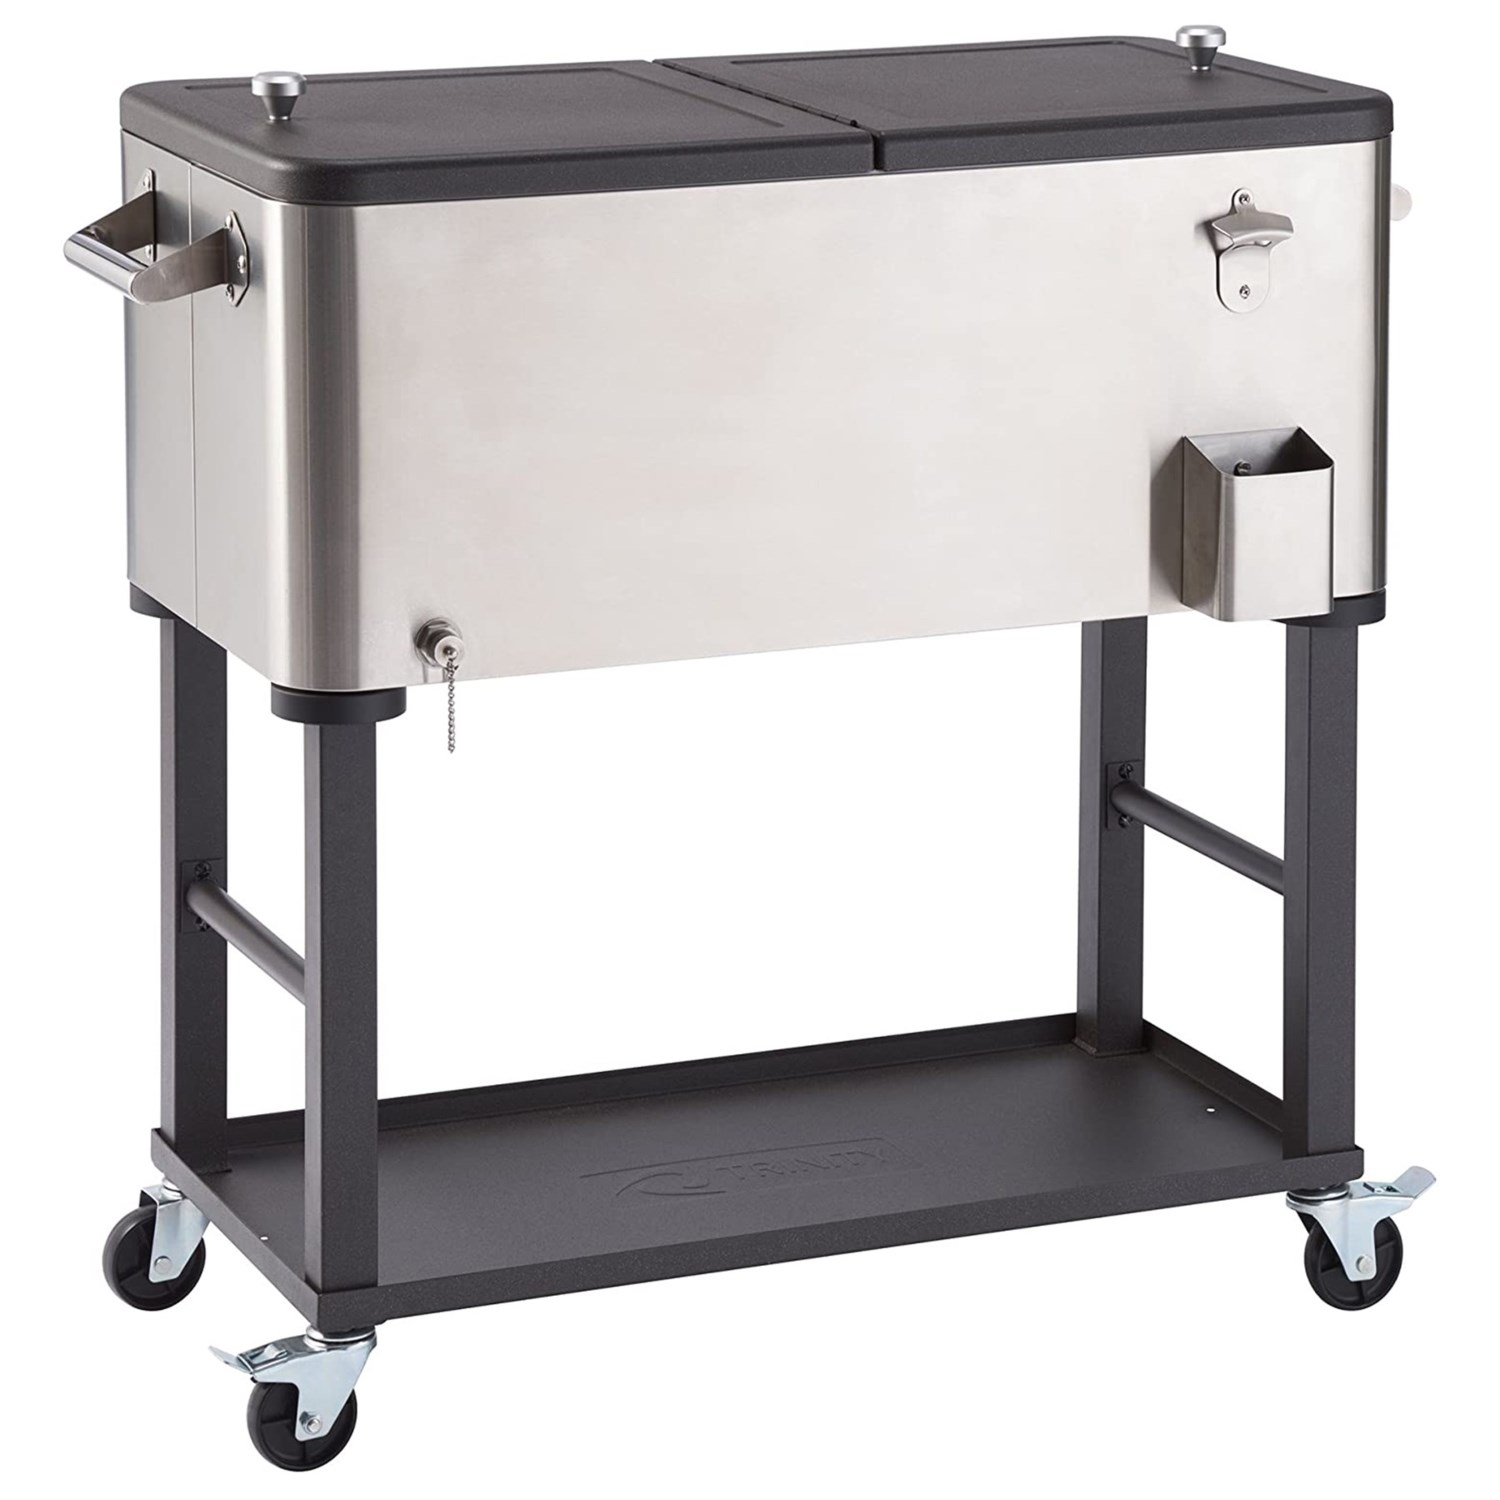 TRINITY Stainless Steel Cooler with Detachable Tub - 80 qt. - Save 30%